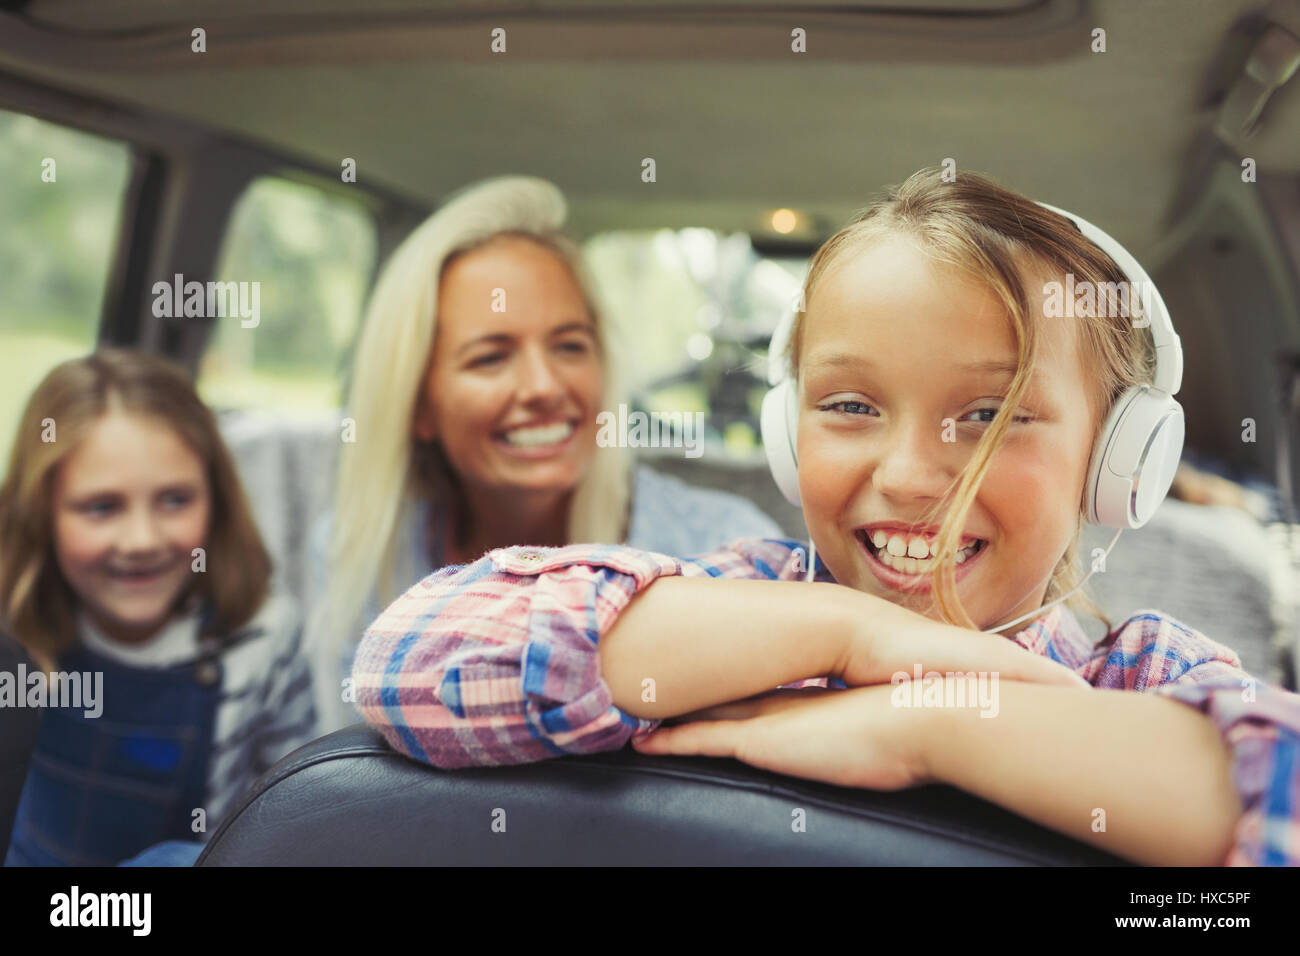 Portrait smiling girl wearing headphones in back seat of car Stock Photo